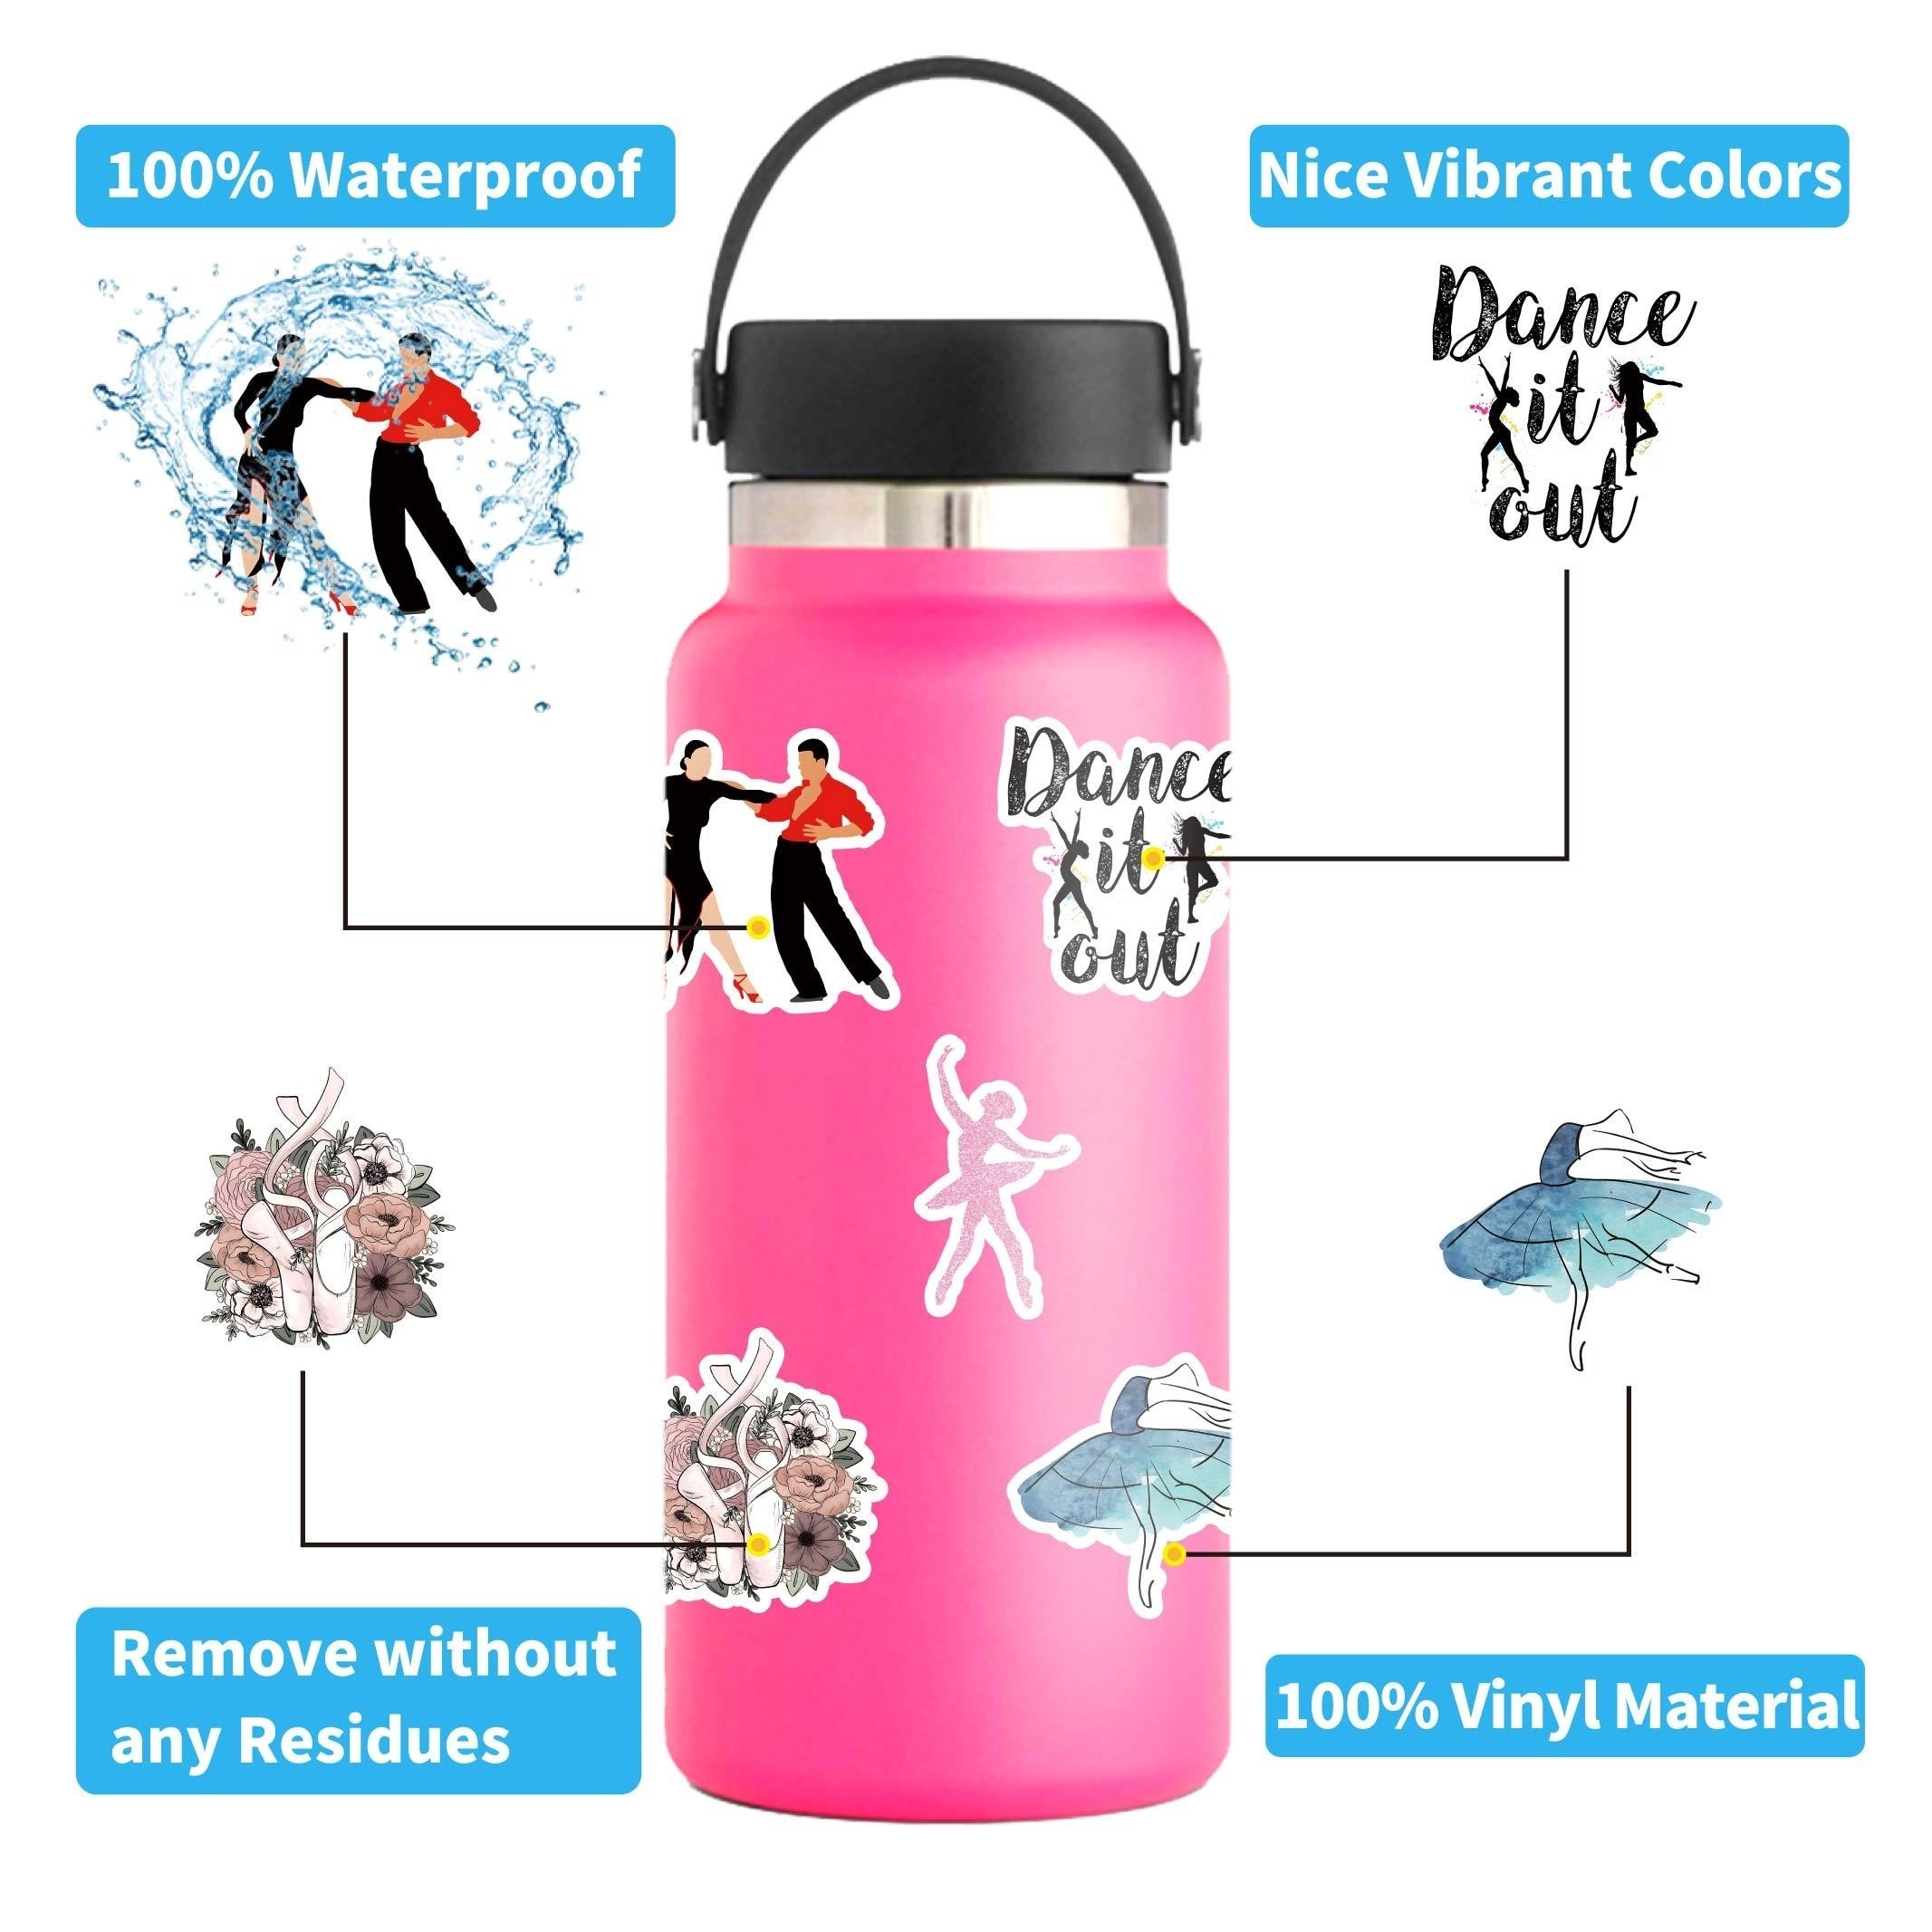 Clerance! 100pcs Preppy Stickers Pink Cute Vinyl Aesthetic Water Bottle  Stickers Waterproof 100 Sticker Pack for Laptop Water Bottles Computer  Phone Stickers for Kids Teen Girls Stocking Stuffer Gift 